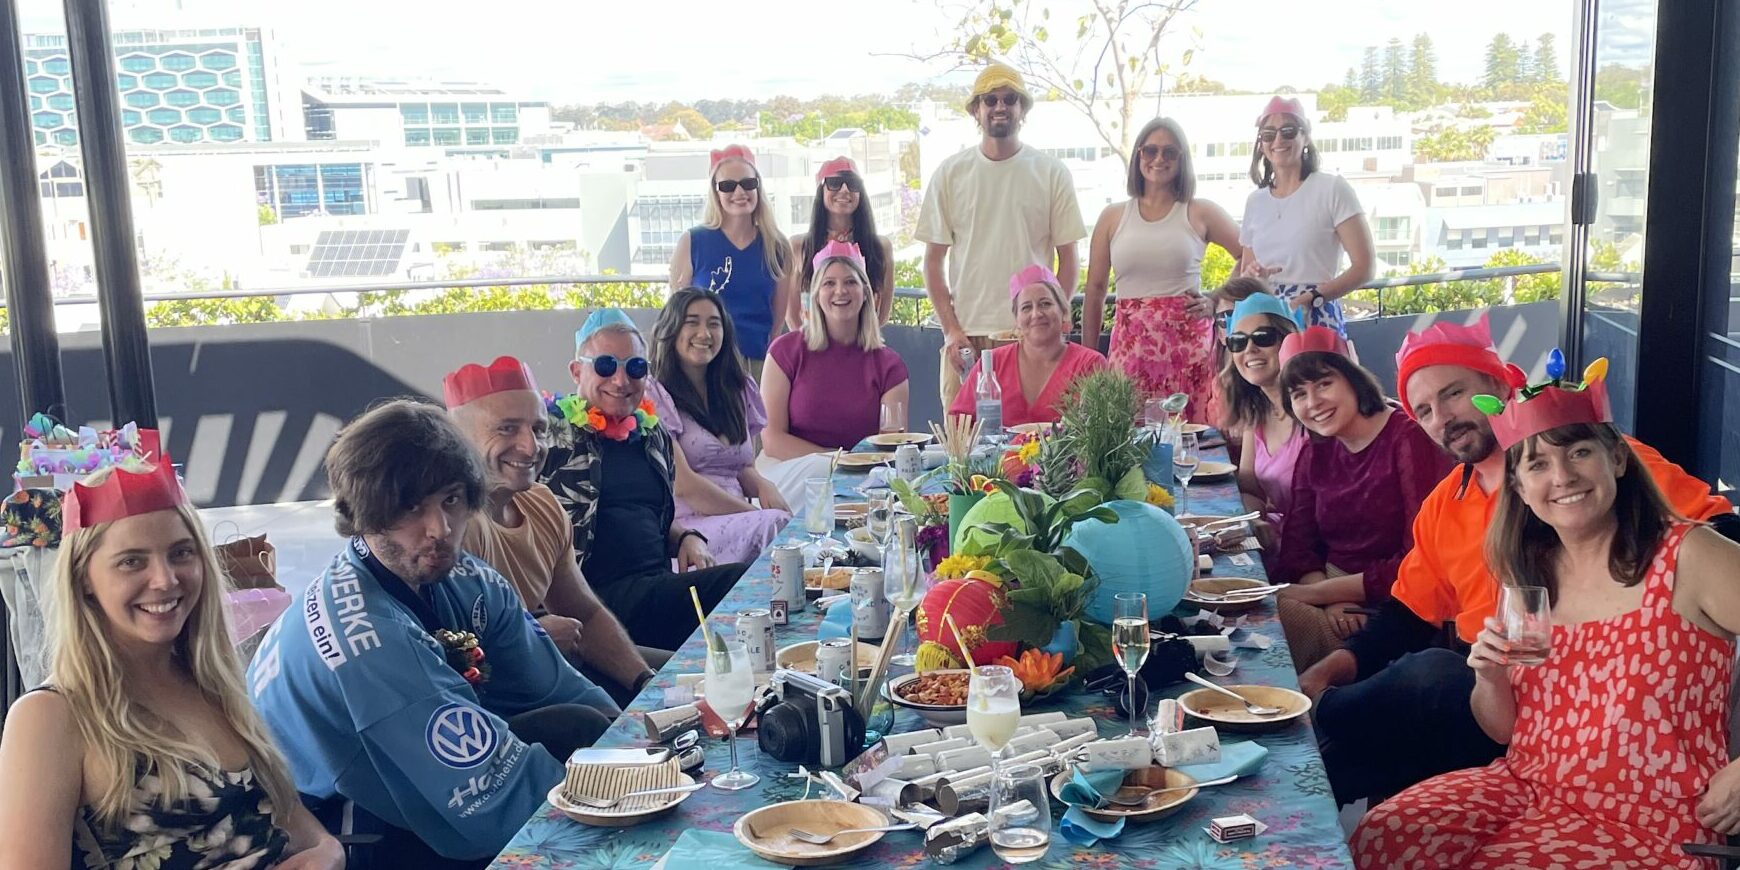 Anthologie team in Christmas hats enjoying lunch together at a long table.